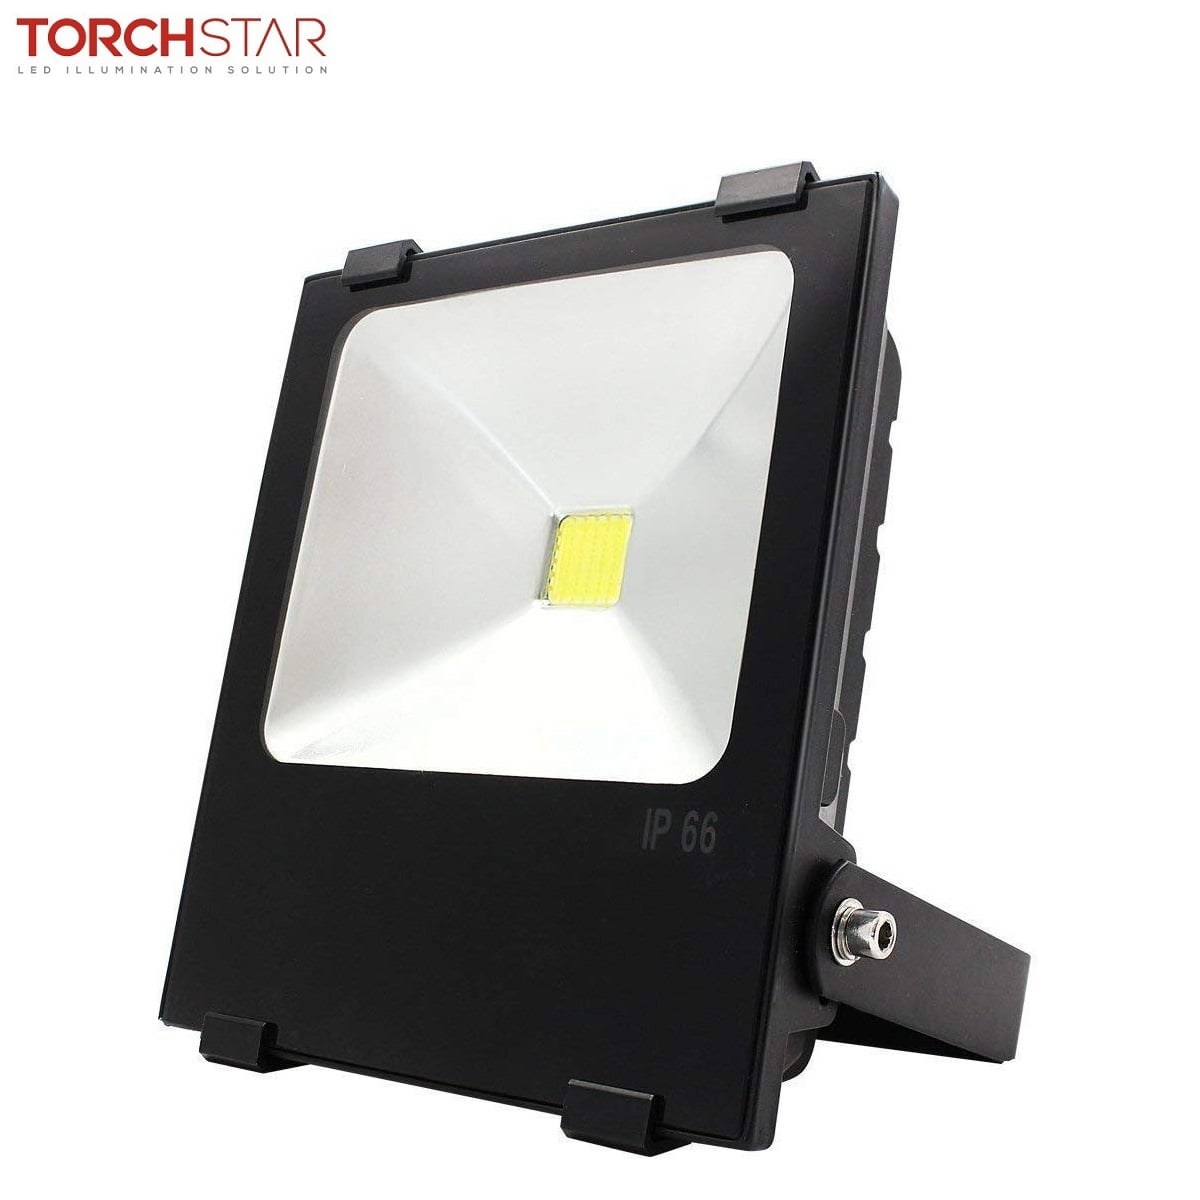 100W LED Floodlight With PIR Sensor Security Wall lamp Cool White Waterproof 